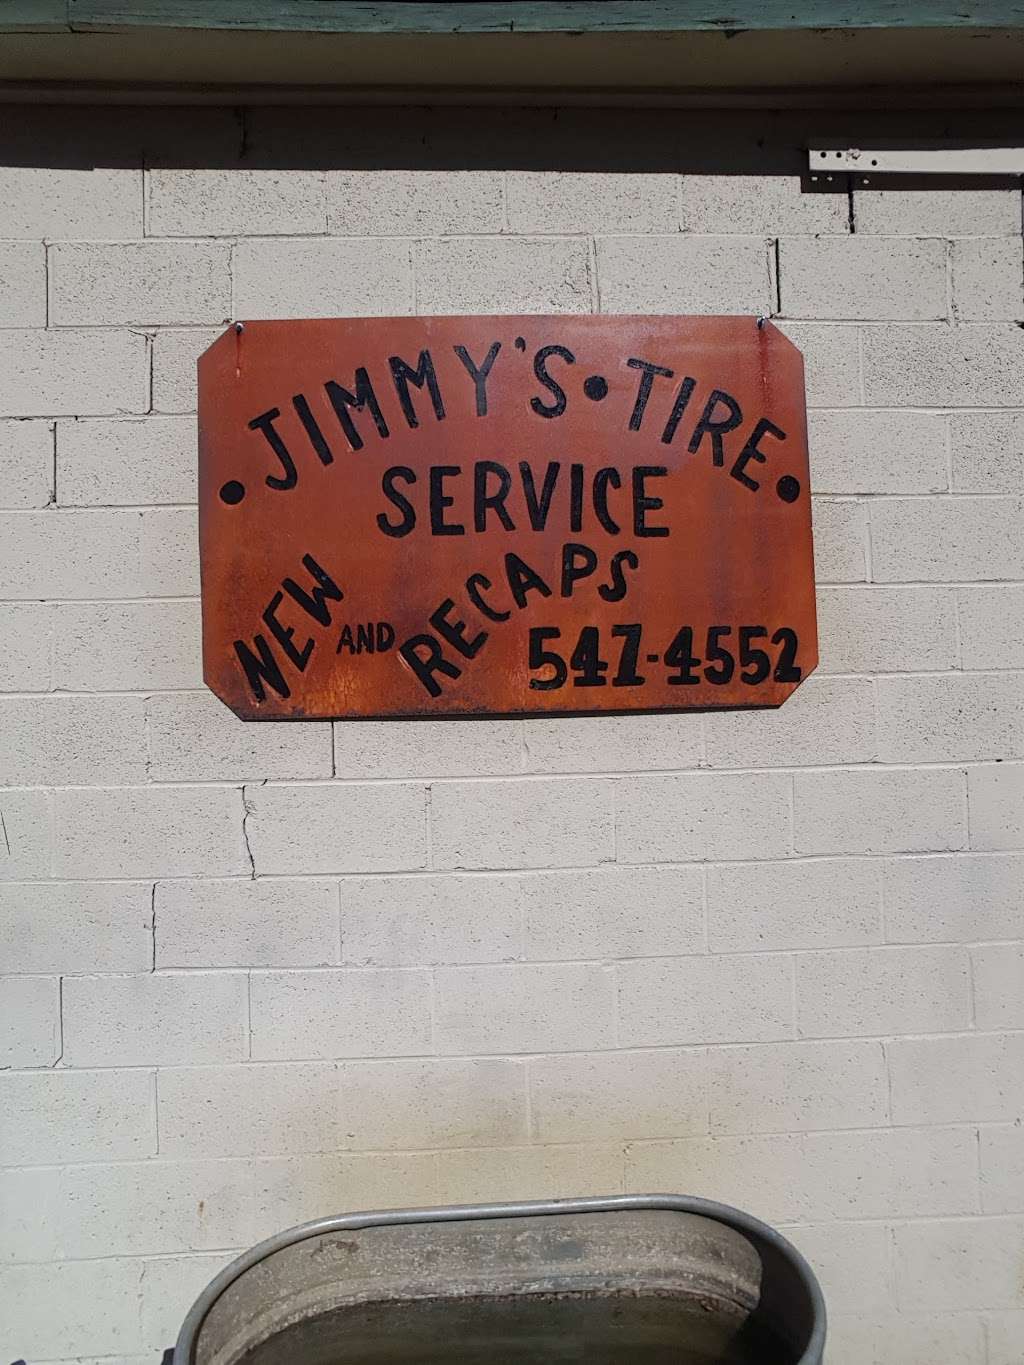 Jimmys Recapping & New Tires | 1450 Banks Rd, Fort Mill, SC 29715, USA | Phone: (803) 547-4552